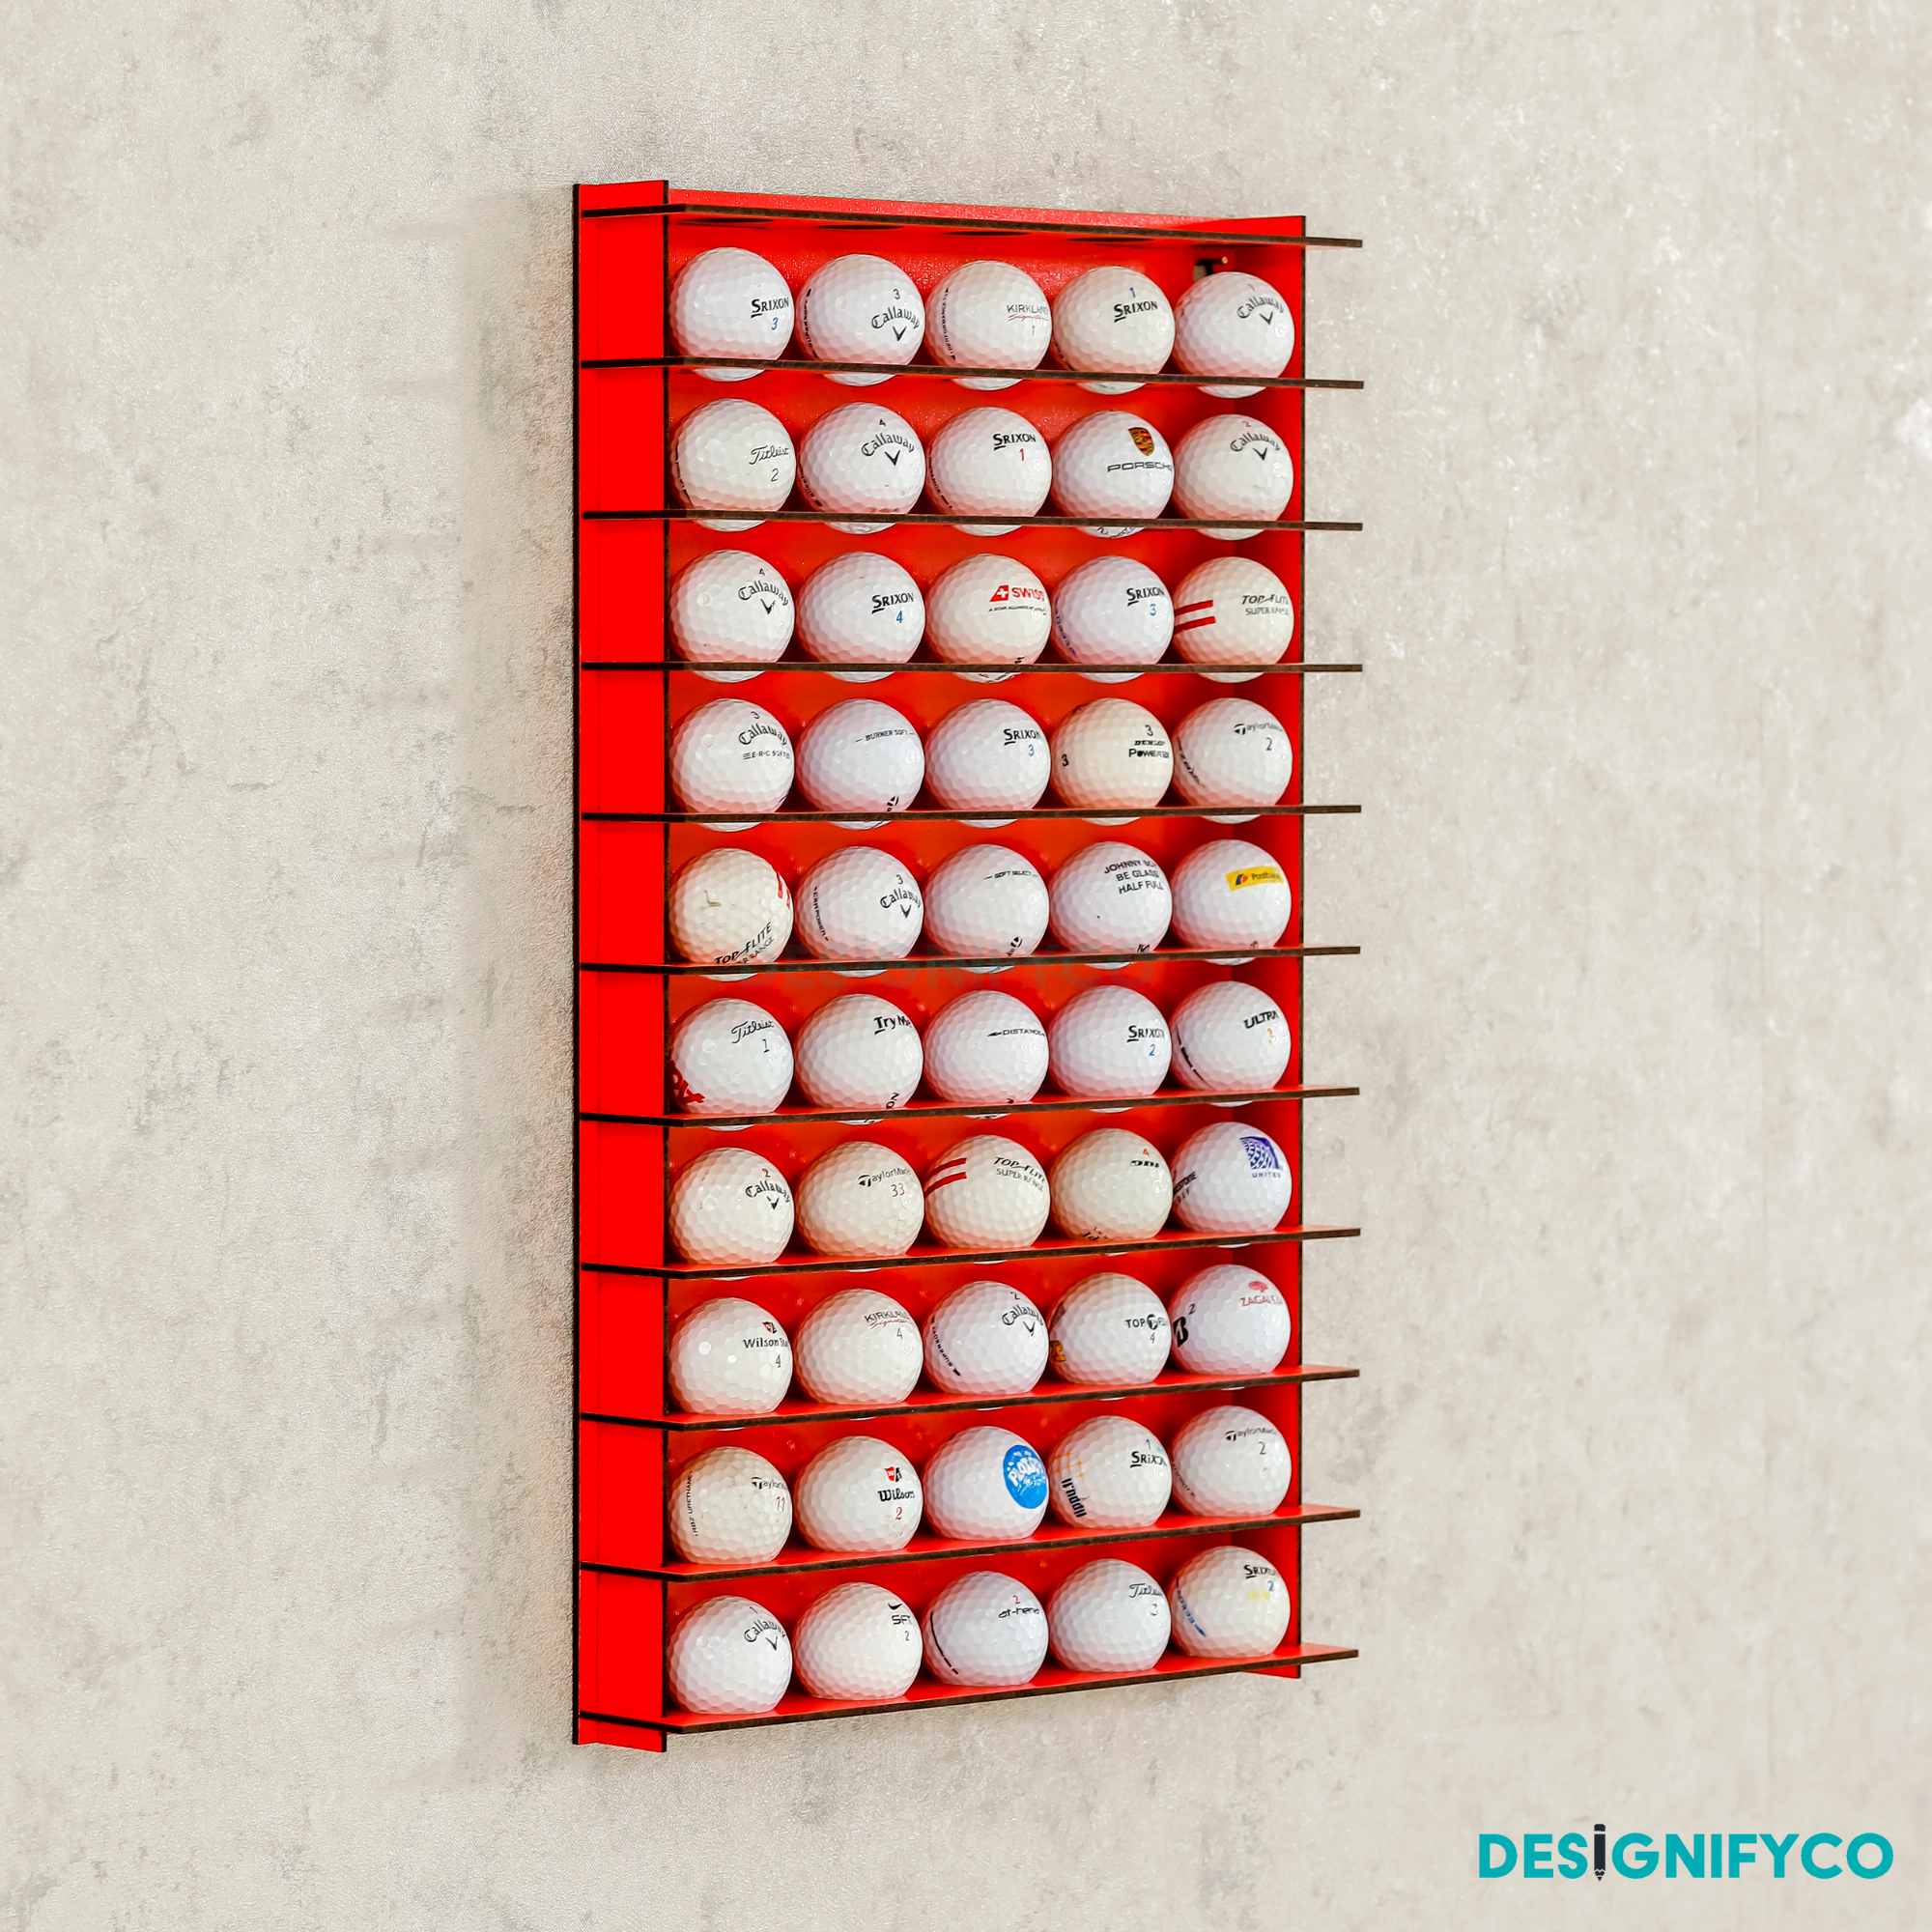 RED Golf Ball Display For 50 Golf Ball